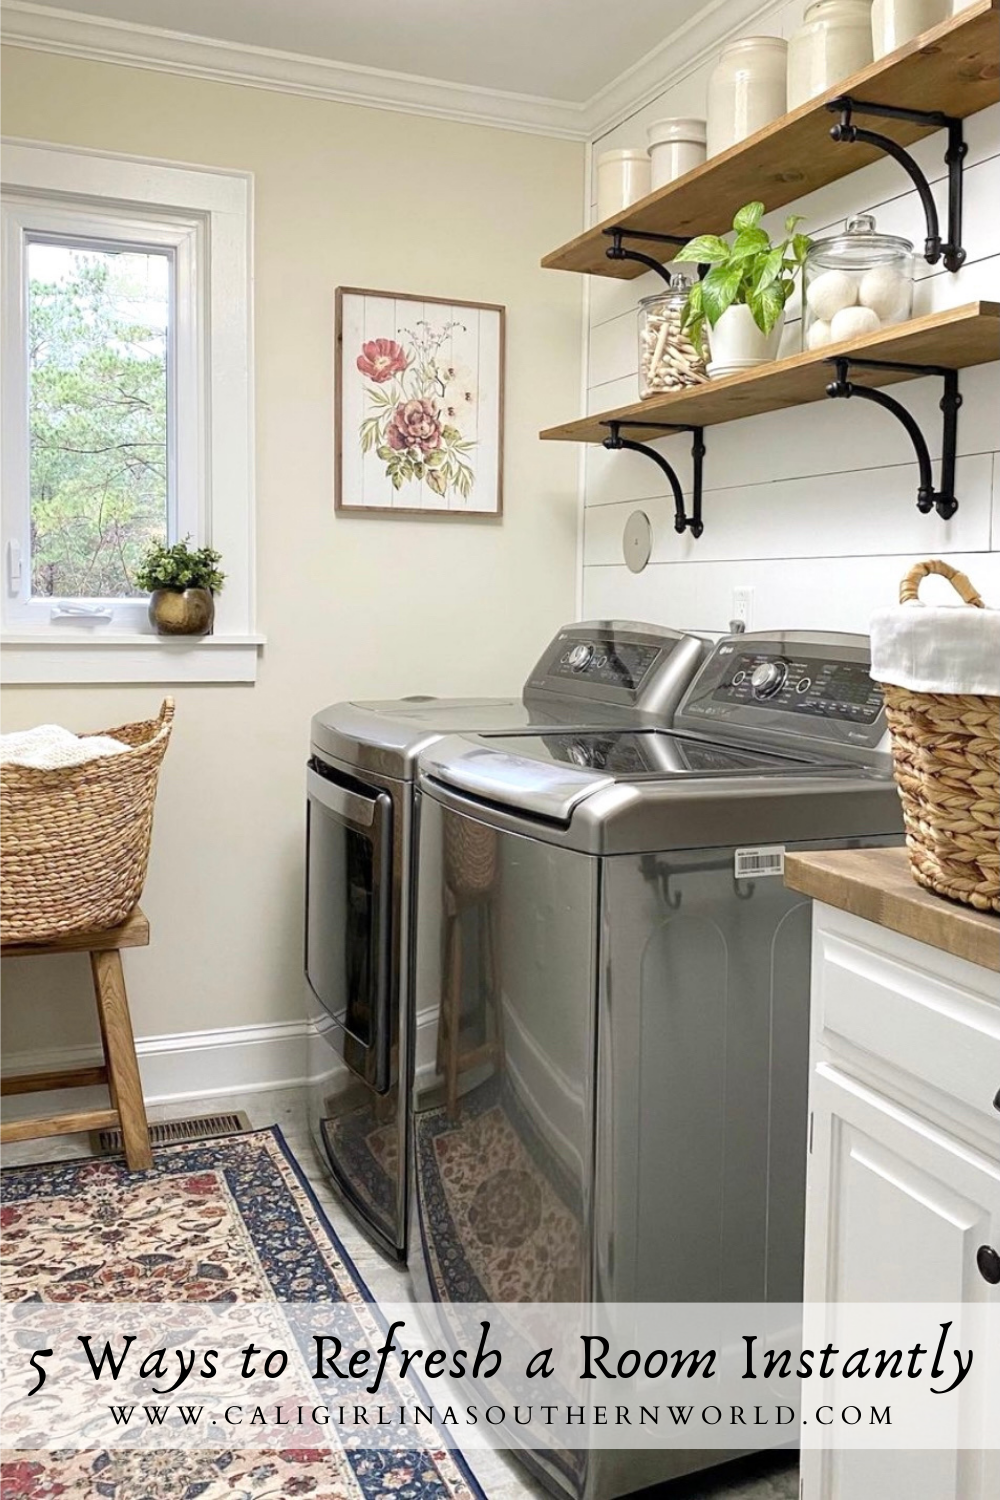 Laundry room with laundry baskets and open shelving.